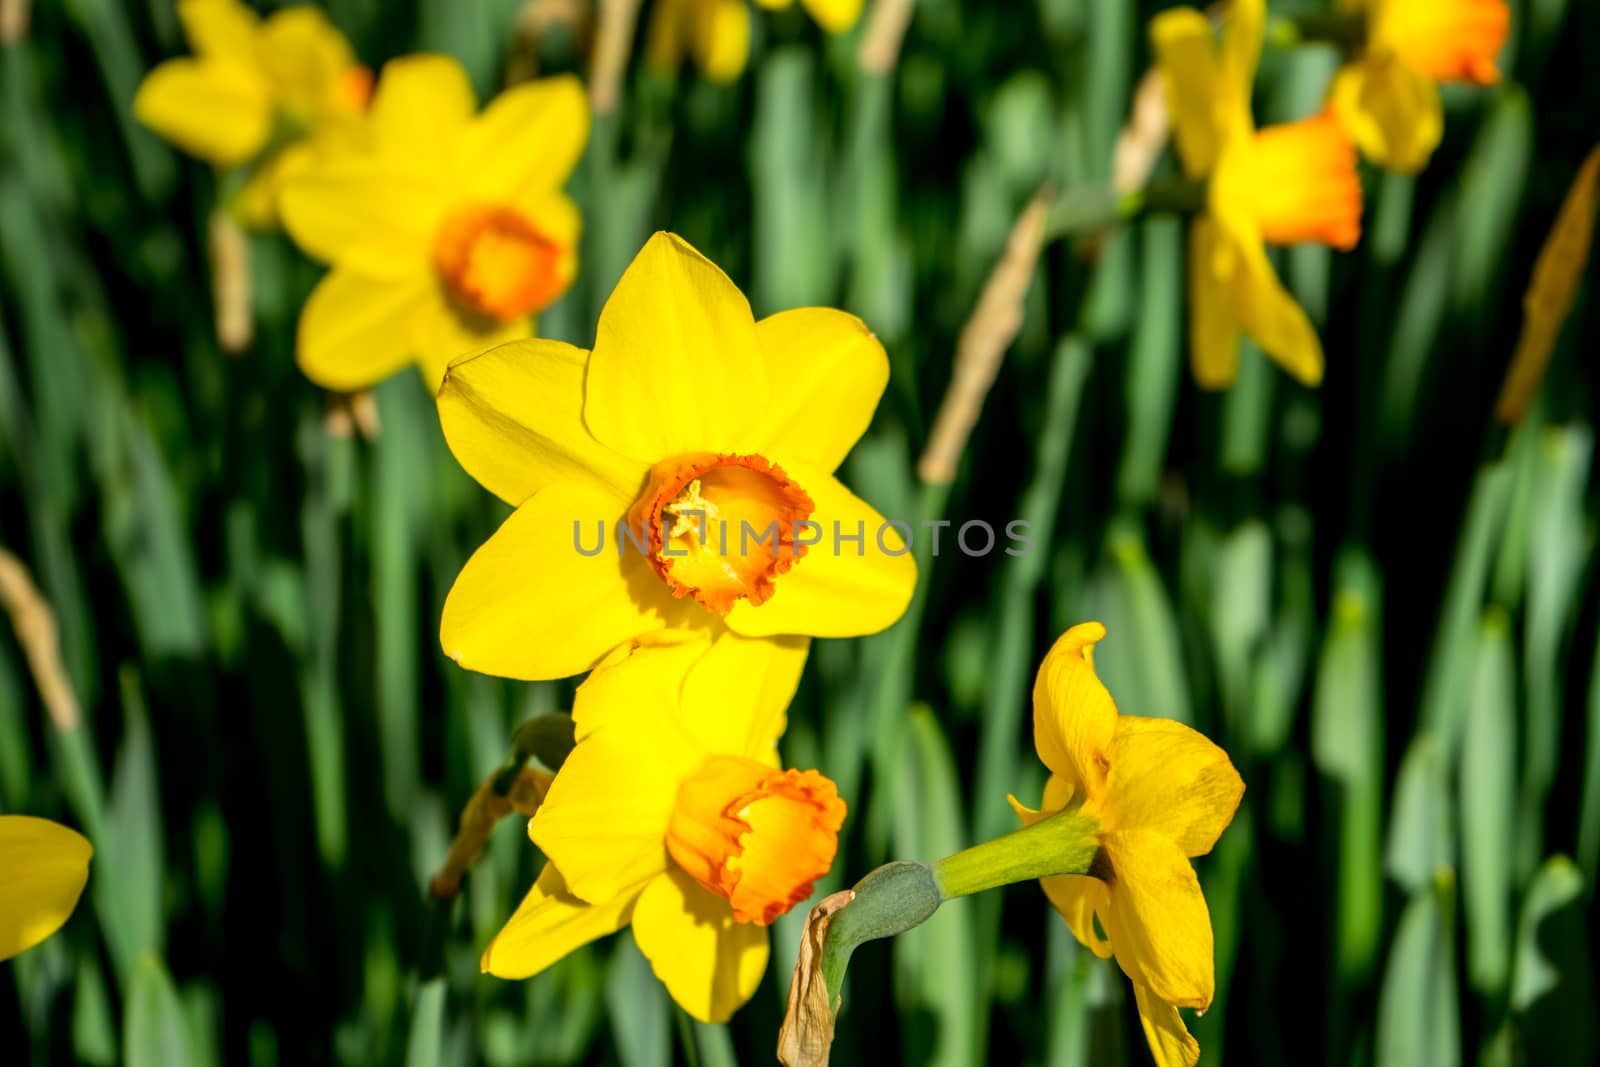 yellow daffodil flowers in a garden in Lisse, Netherlands, Europe on a bright summer day